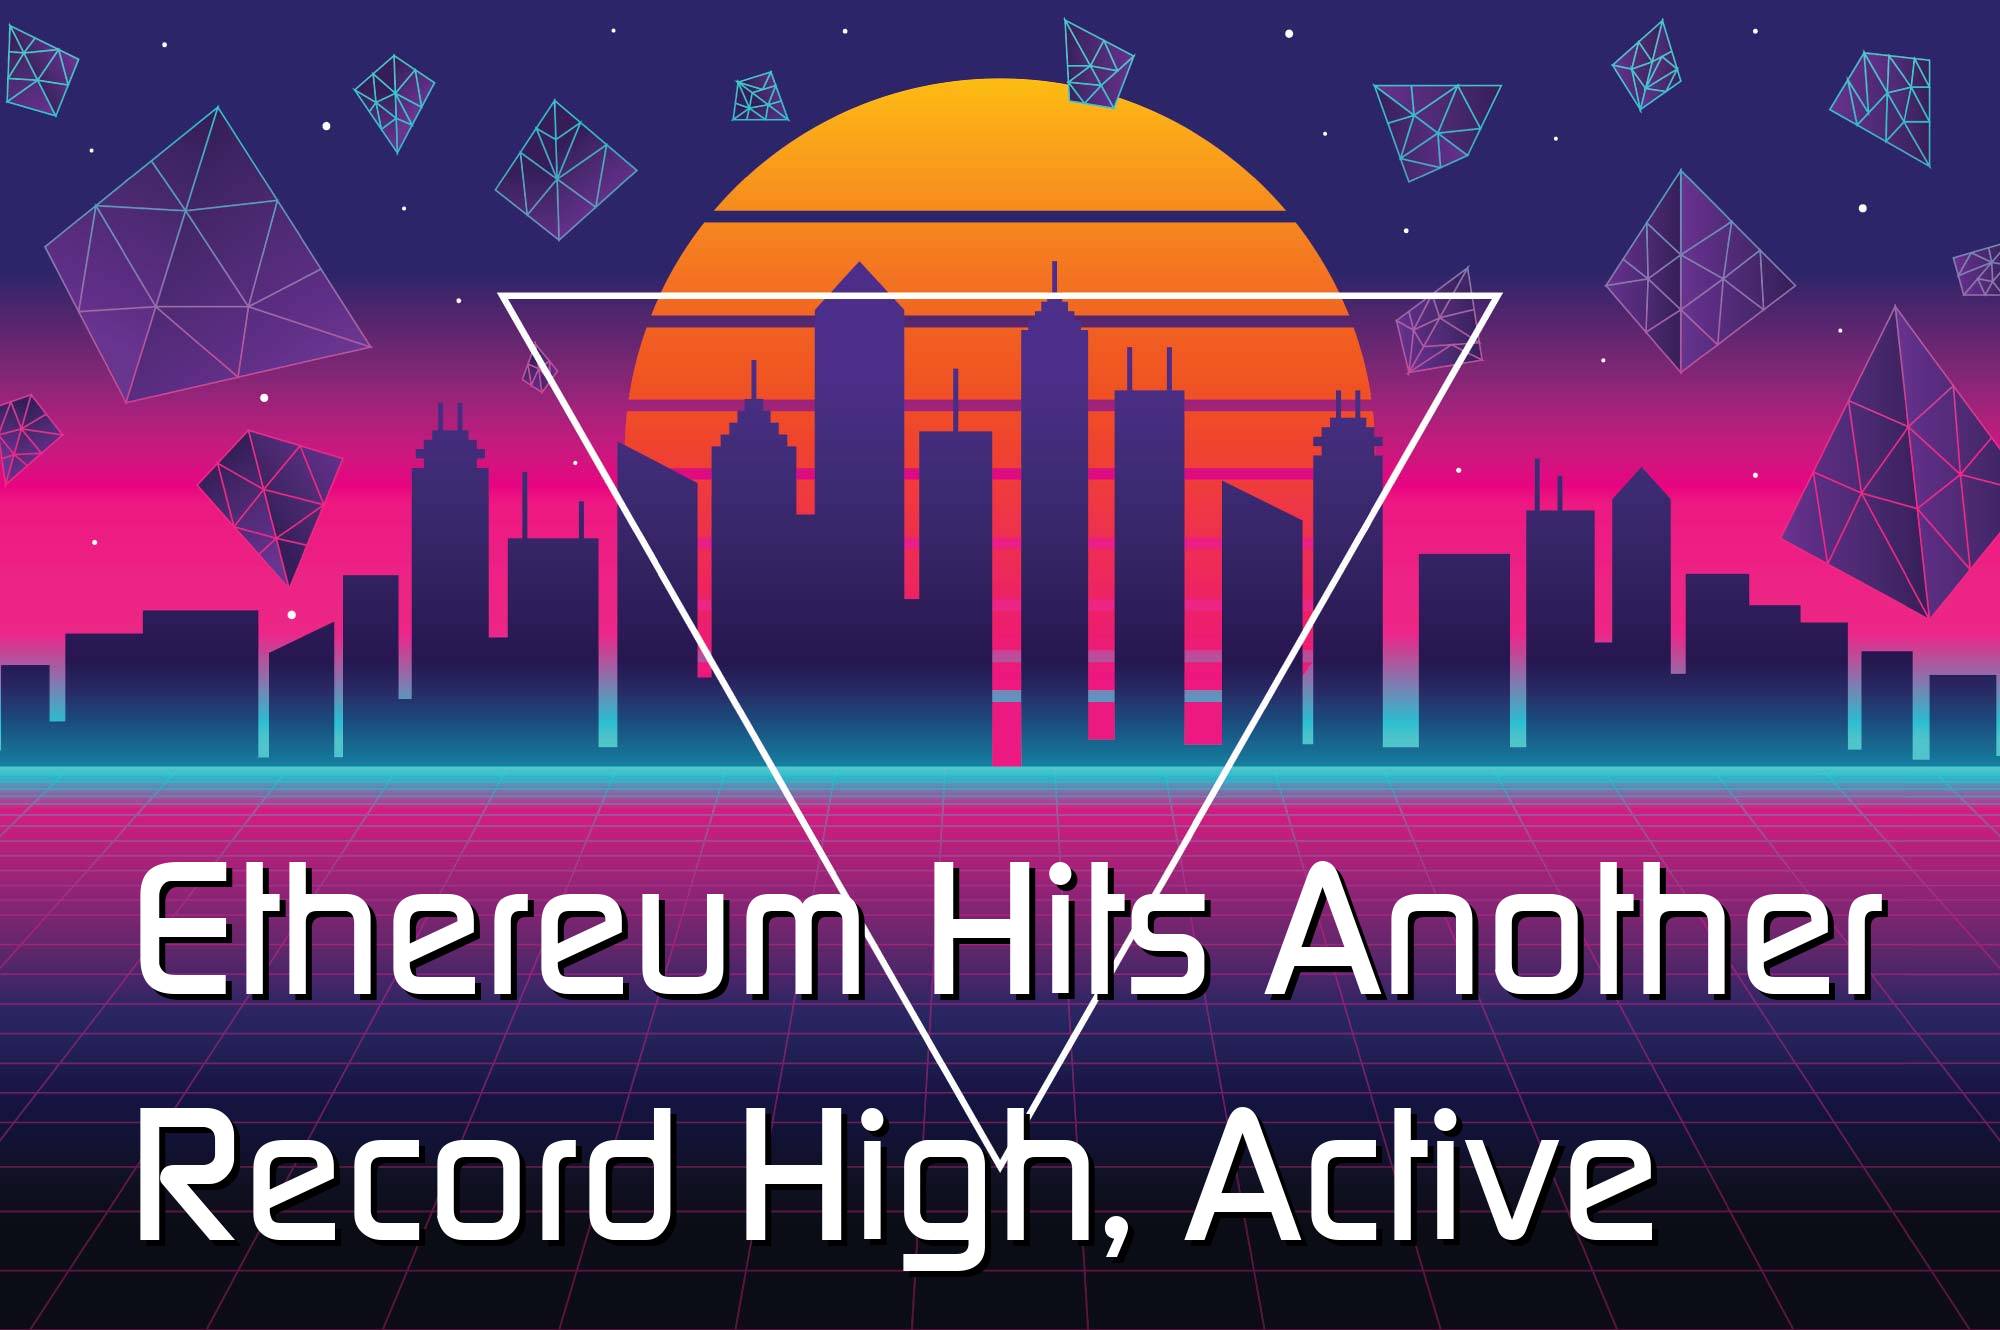 @$62254: Ethereum Hits Another Record High, Active ETH Addresses Jump